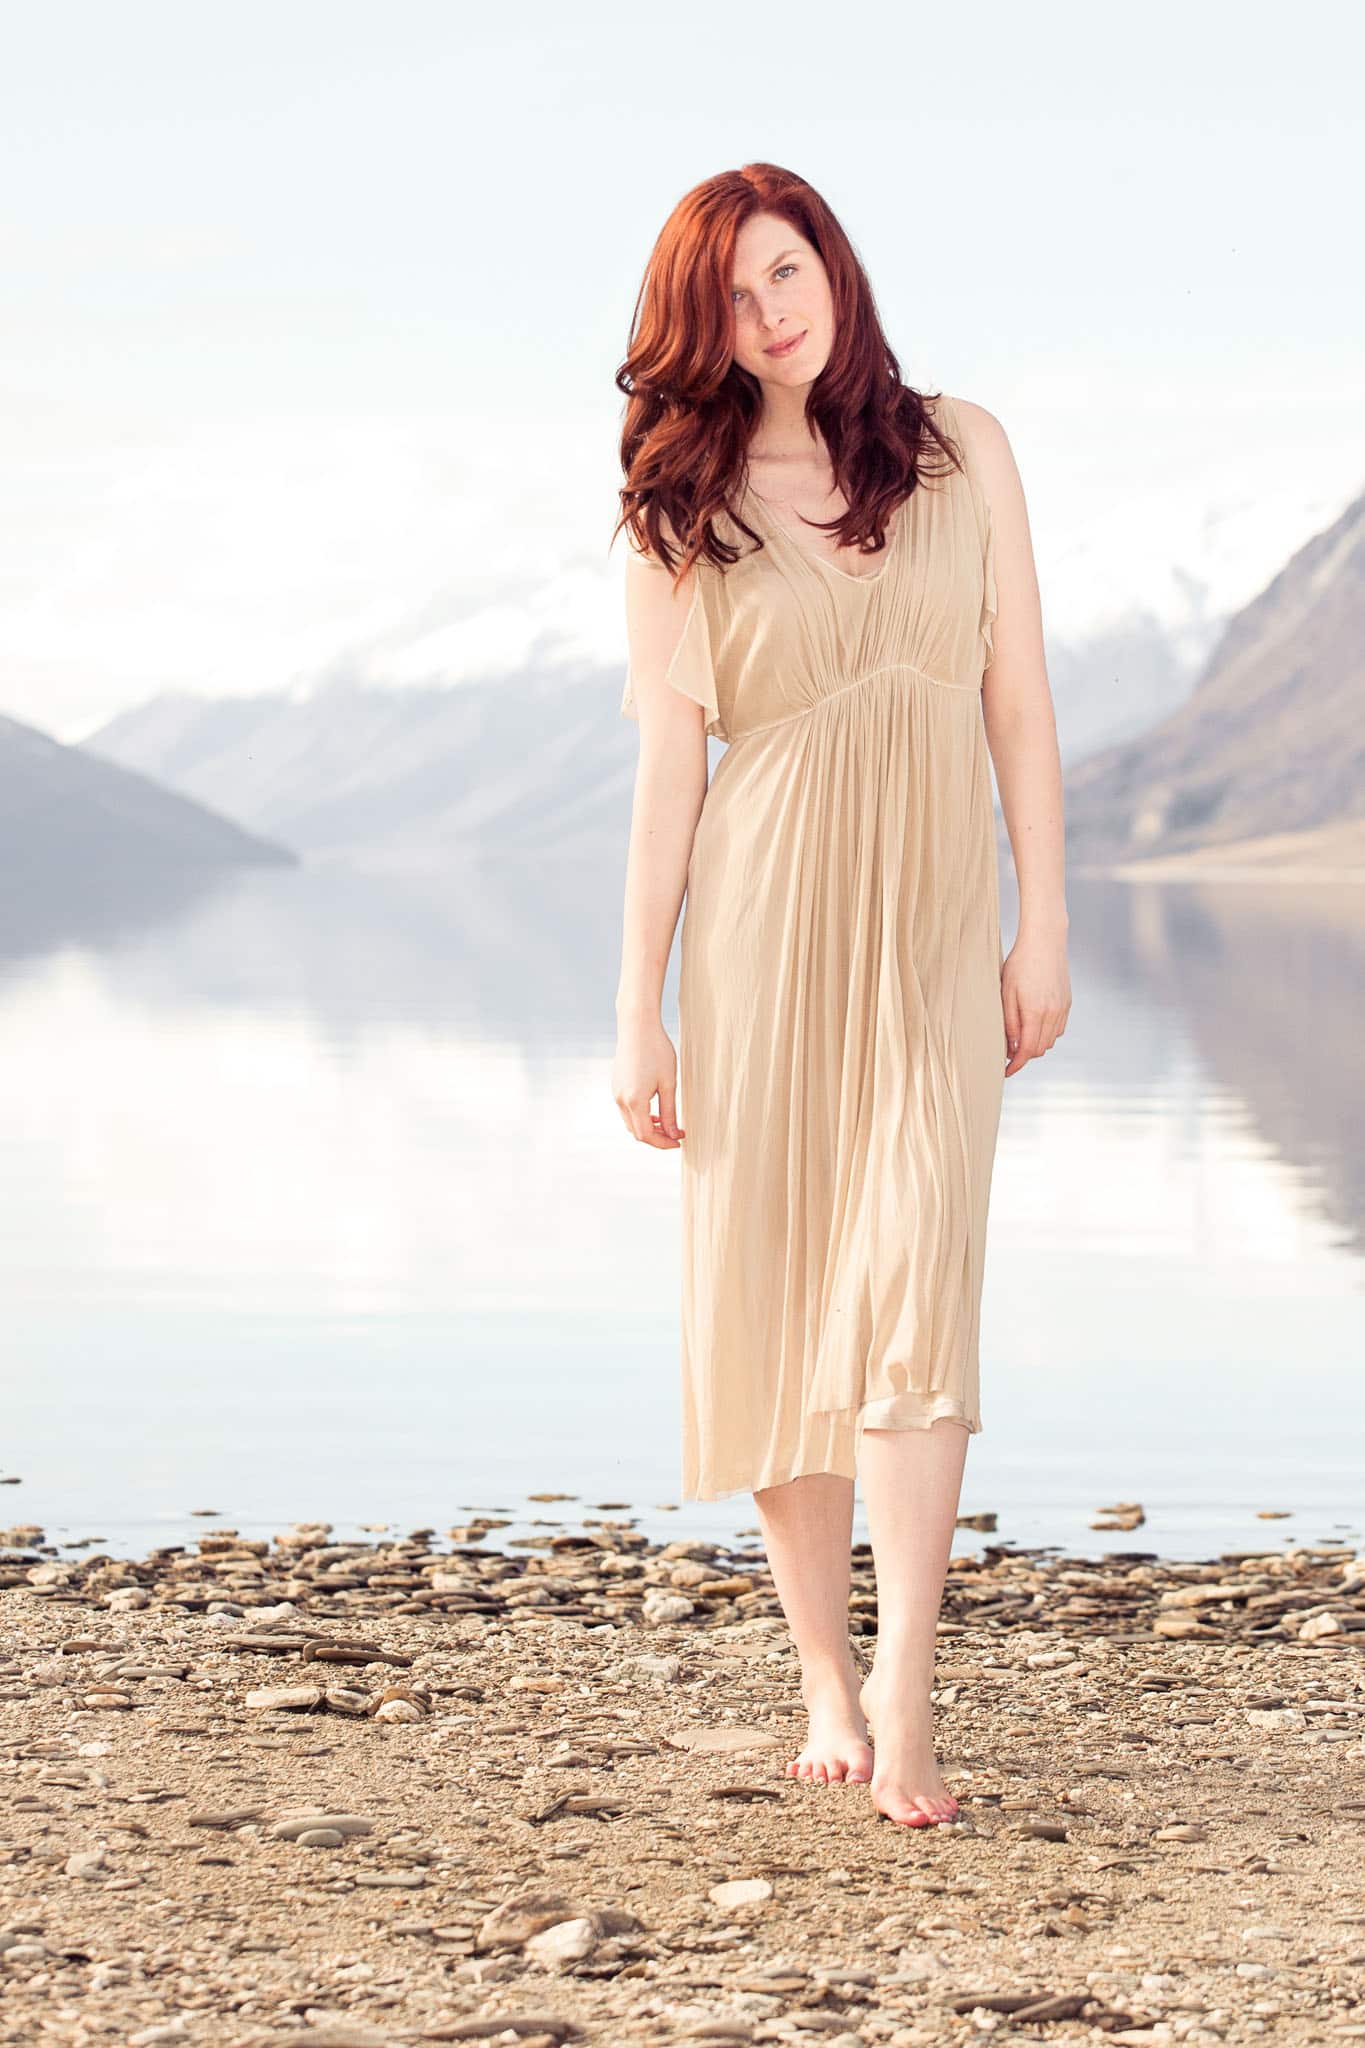 Fashion, lifestyle photography in Queenstown